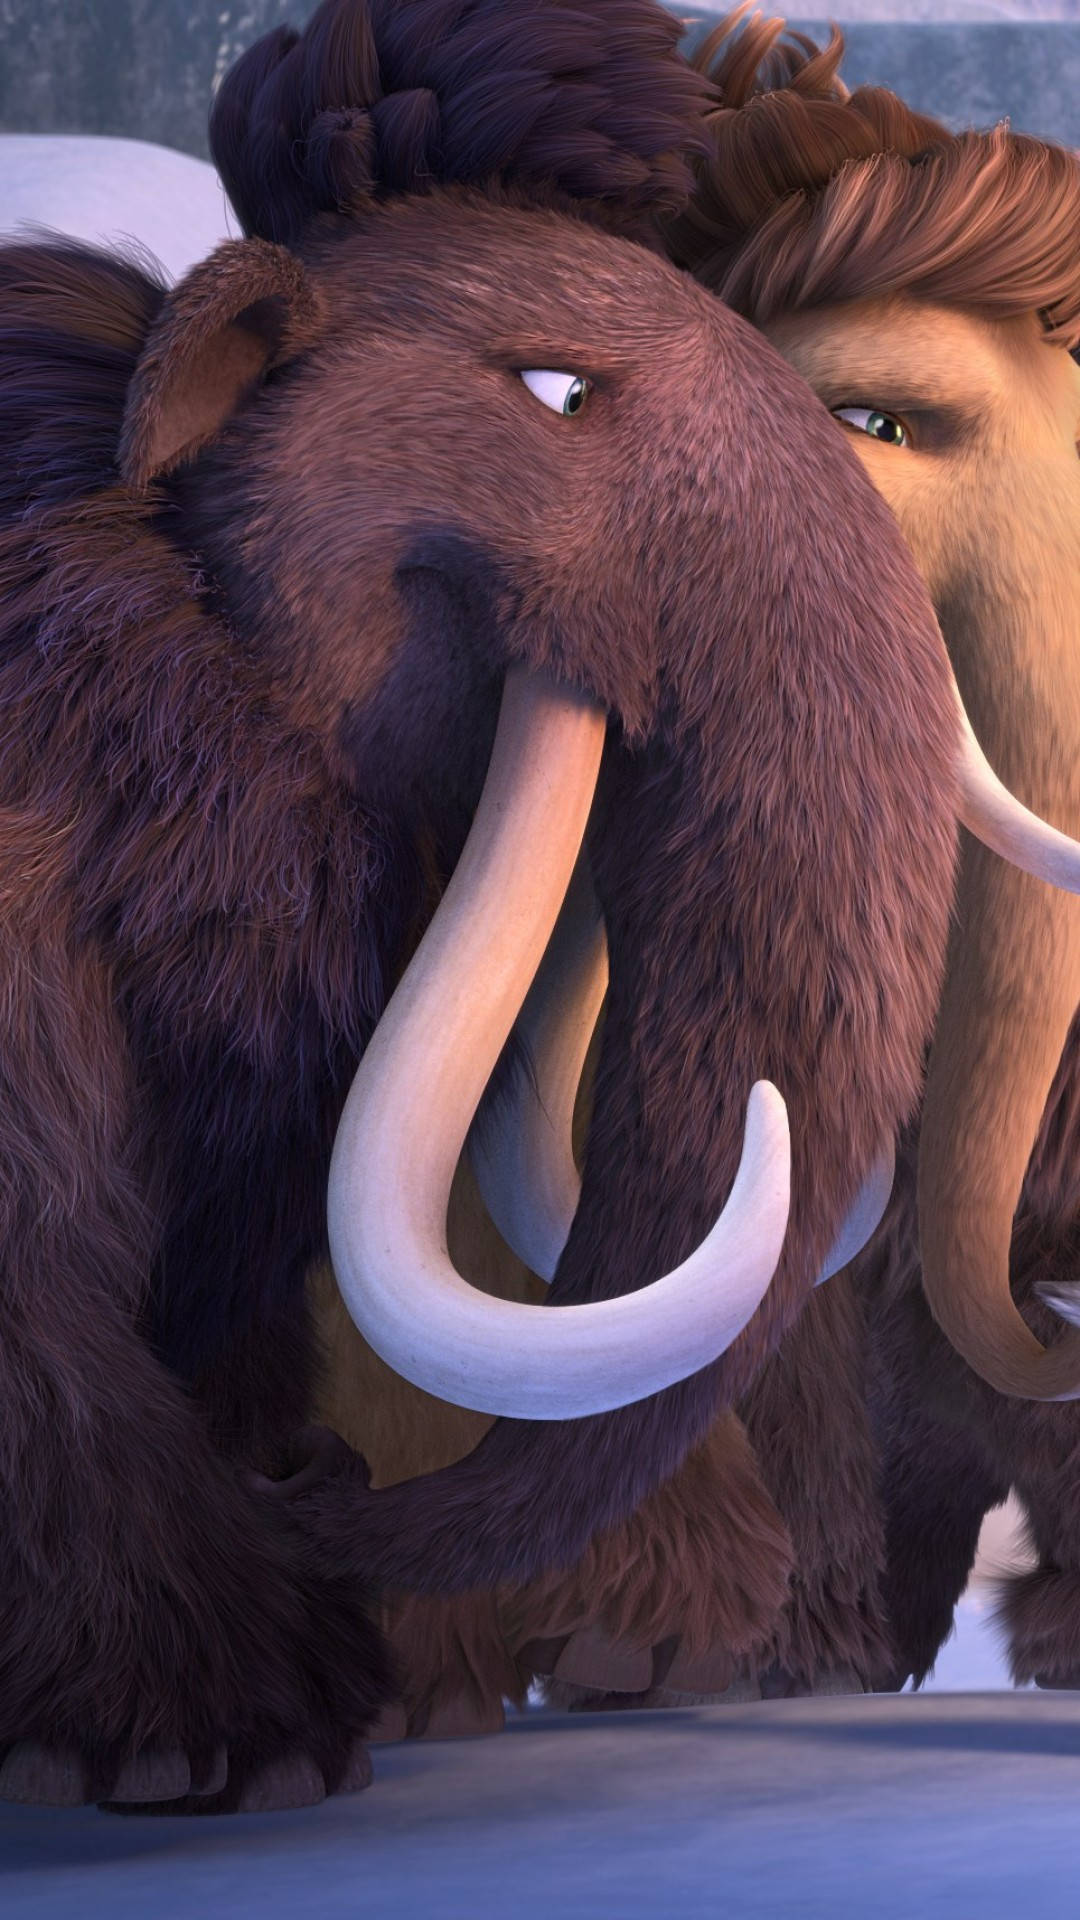 Wallpaper Image Of The Mammoth Couple Manny And Ellie From Ice Age